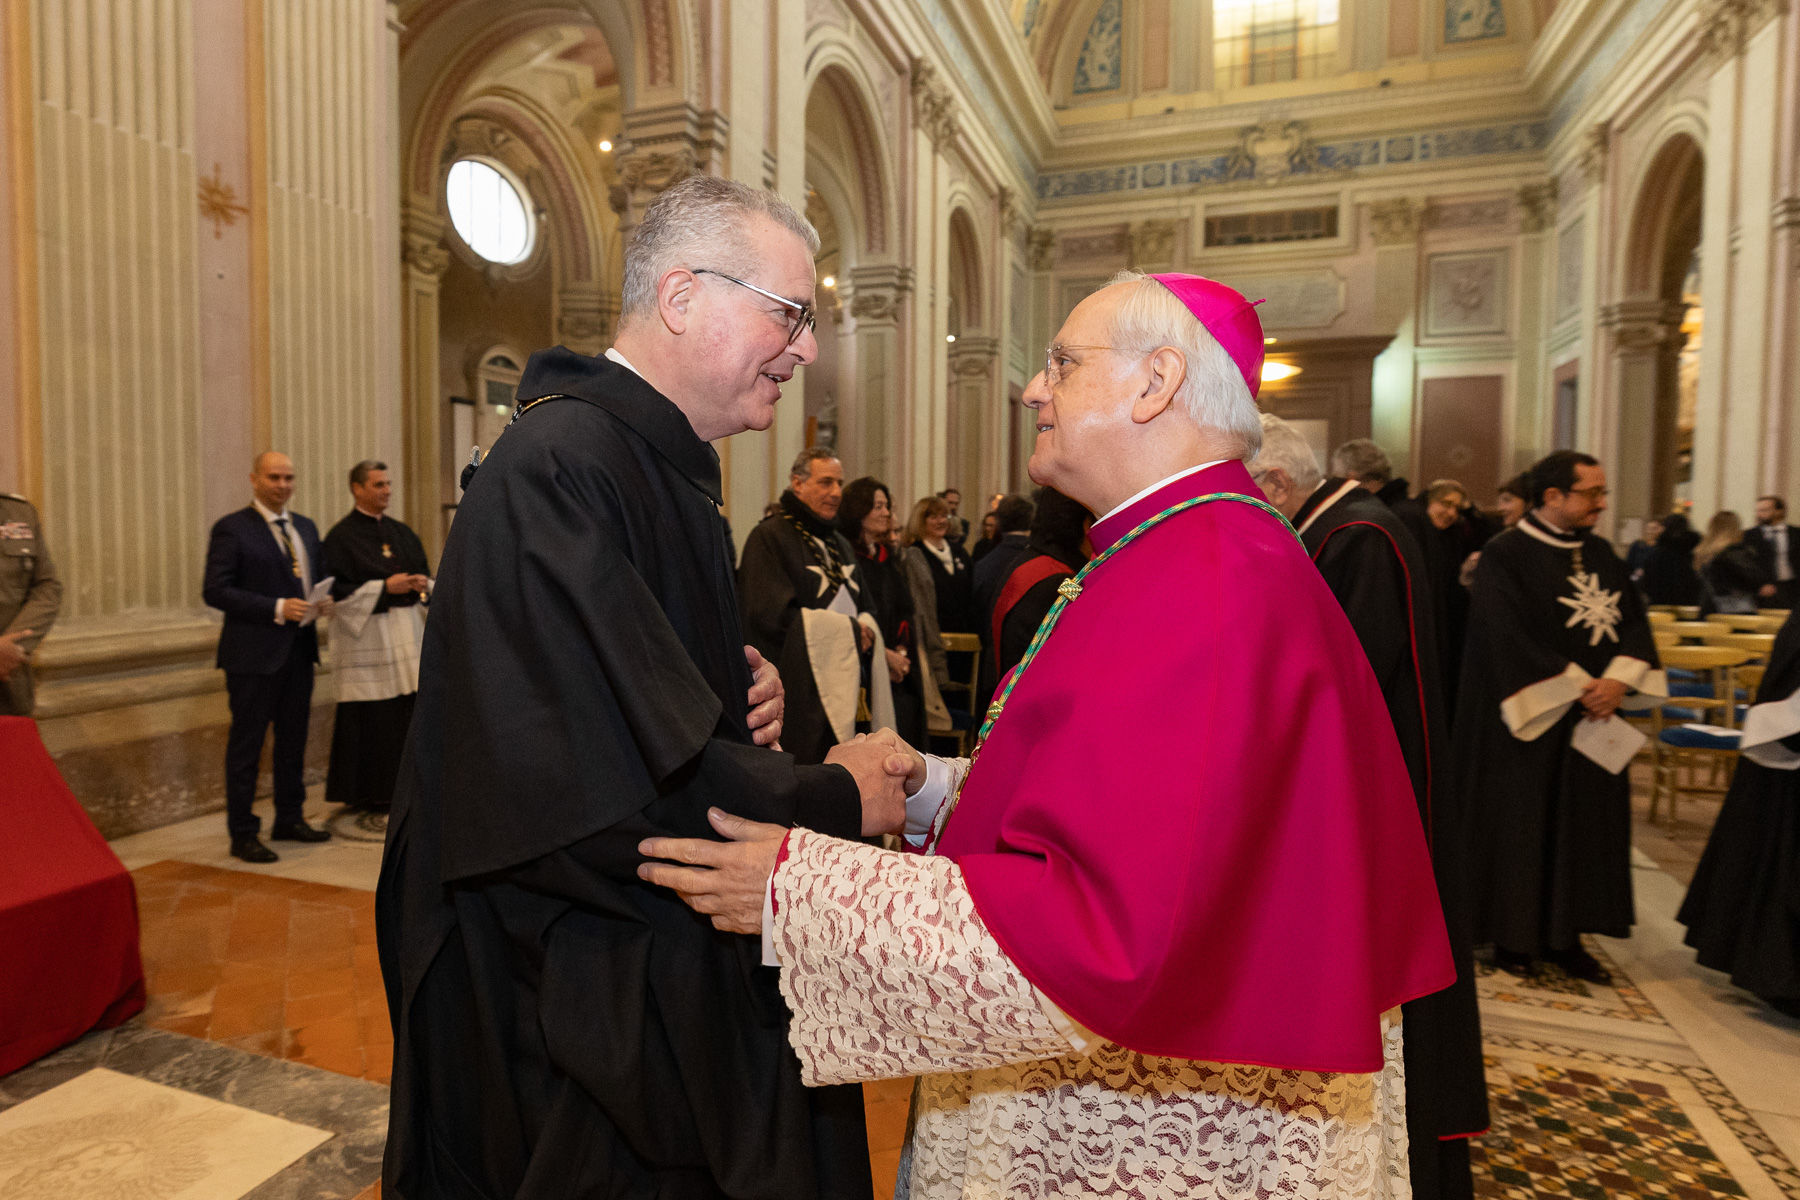 Mass for the Prelate of the Order of Malta: invitation to serve with joy